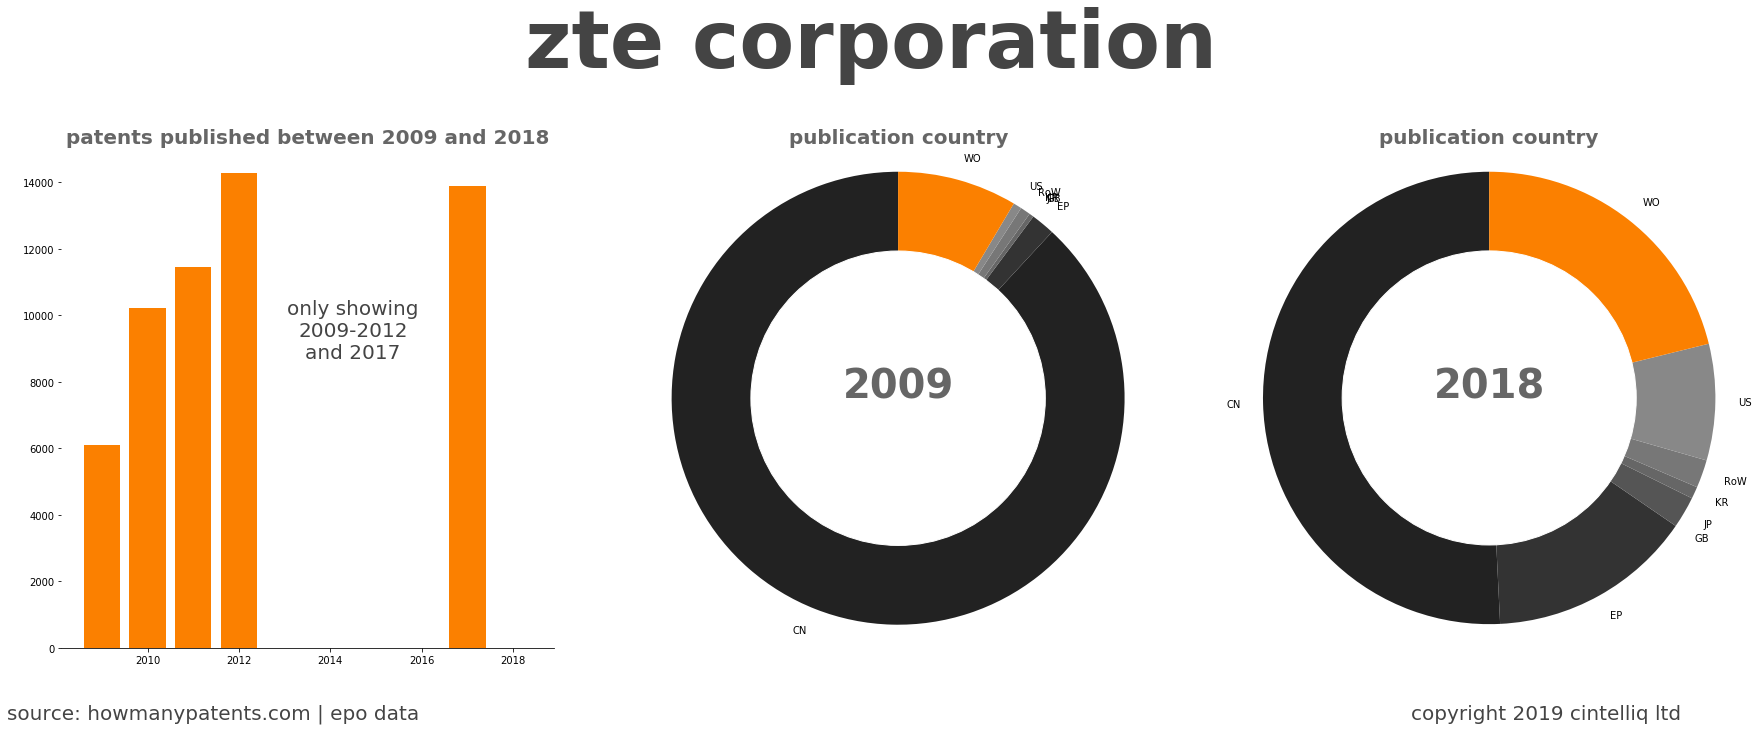 summary of patents for Zte Corporation